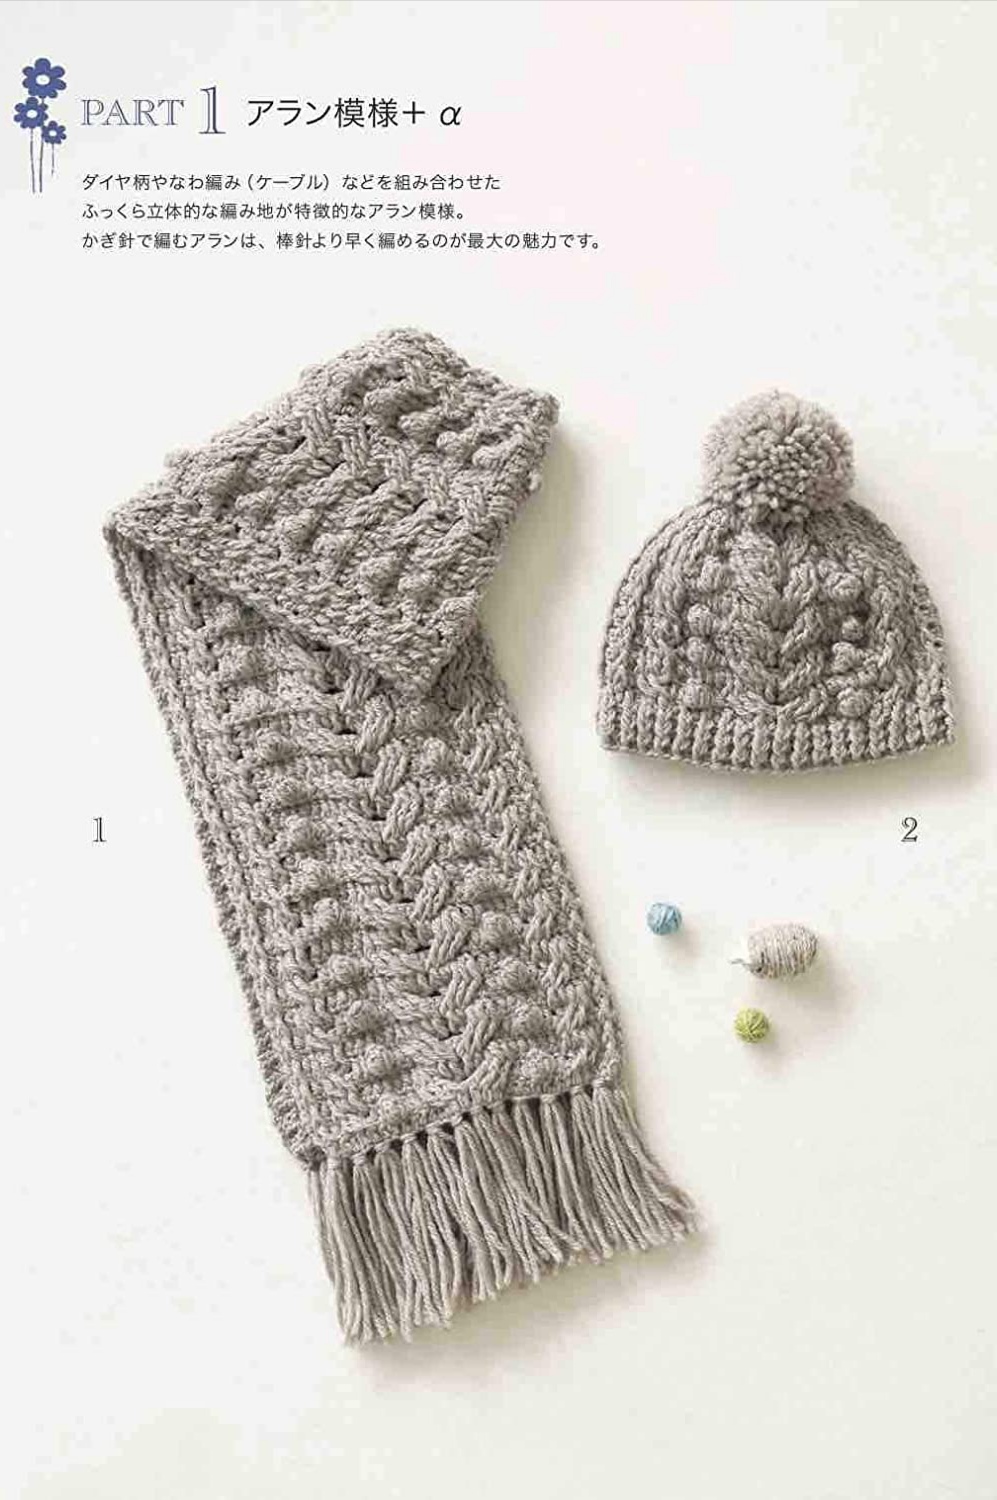 Hand Knitted Hats, Scarves, Snoods BOOK